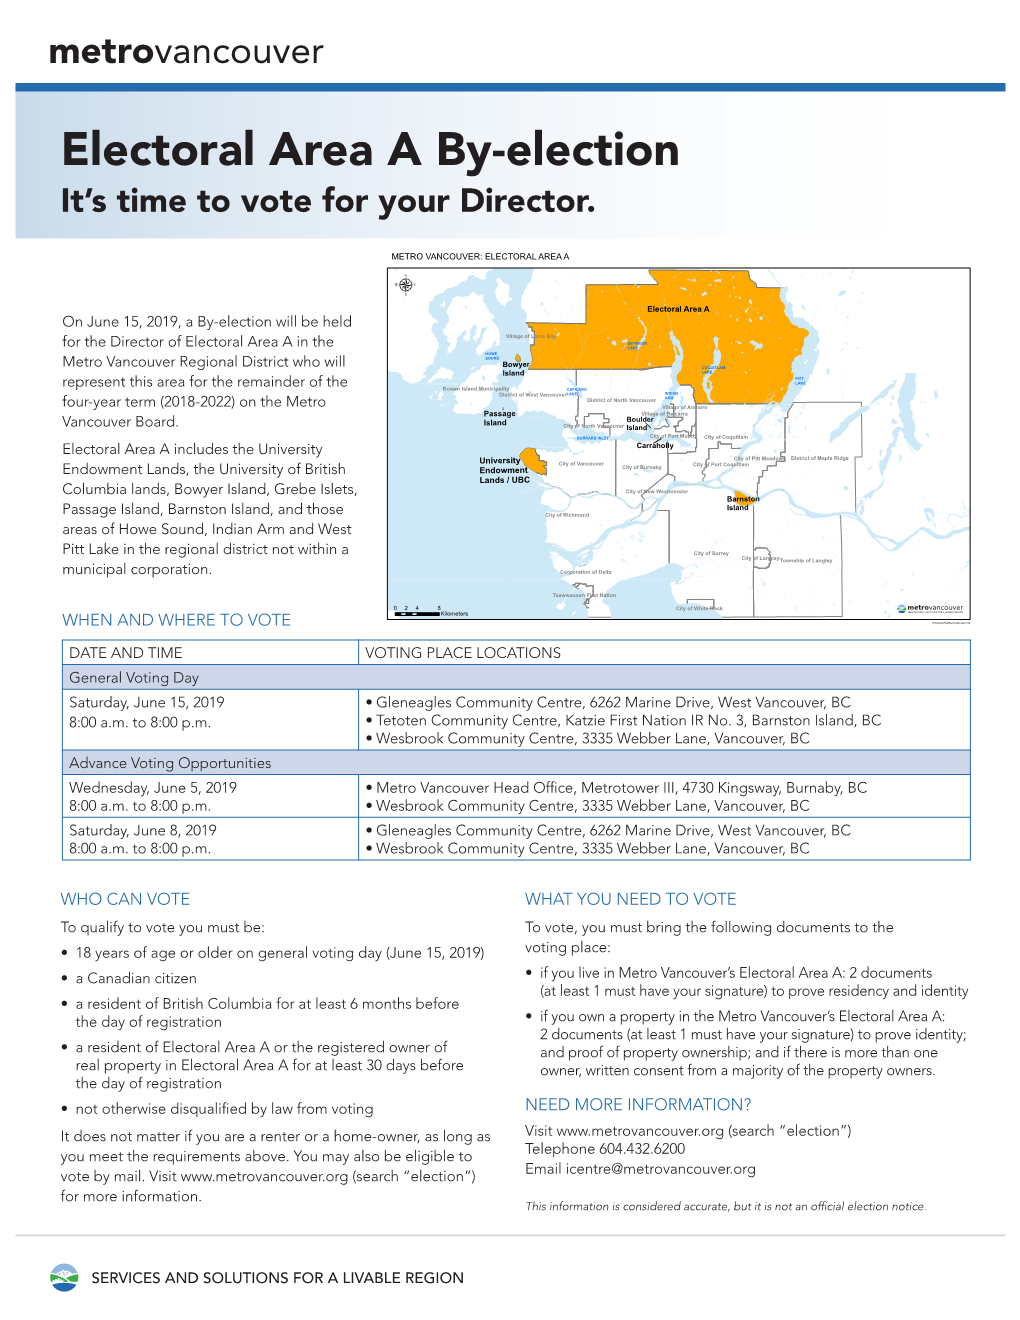 Electoral Area a By-Election It’S Time to Vote for Your Director